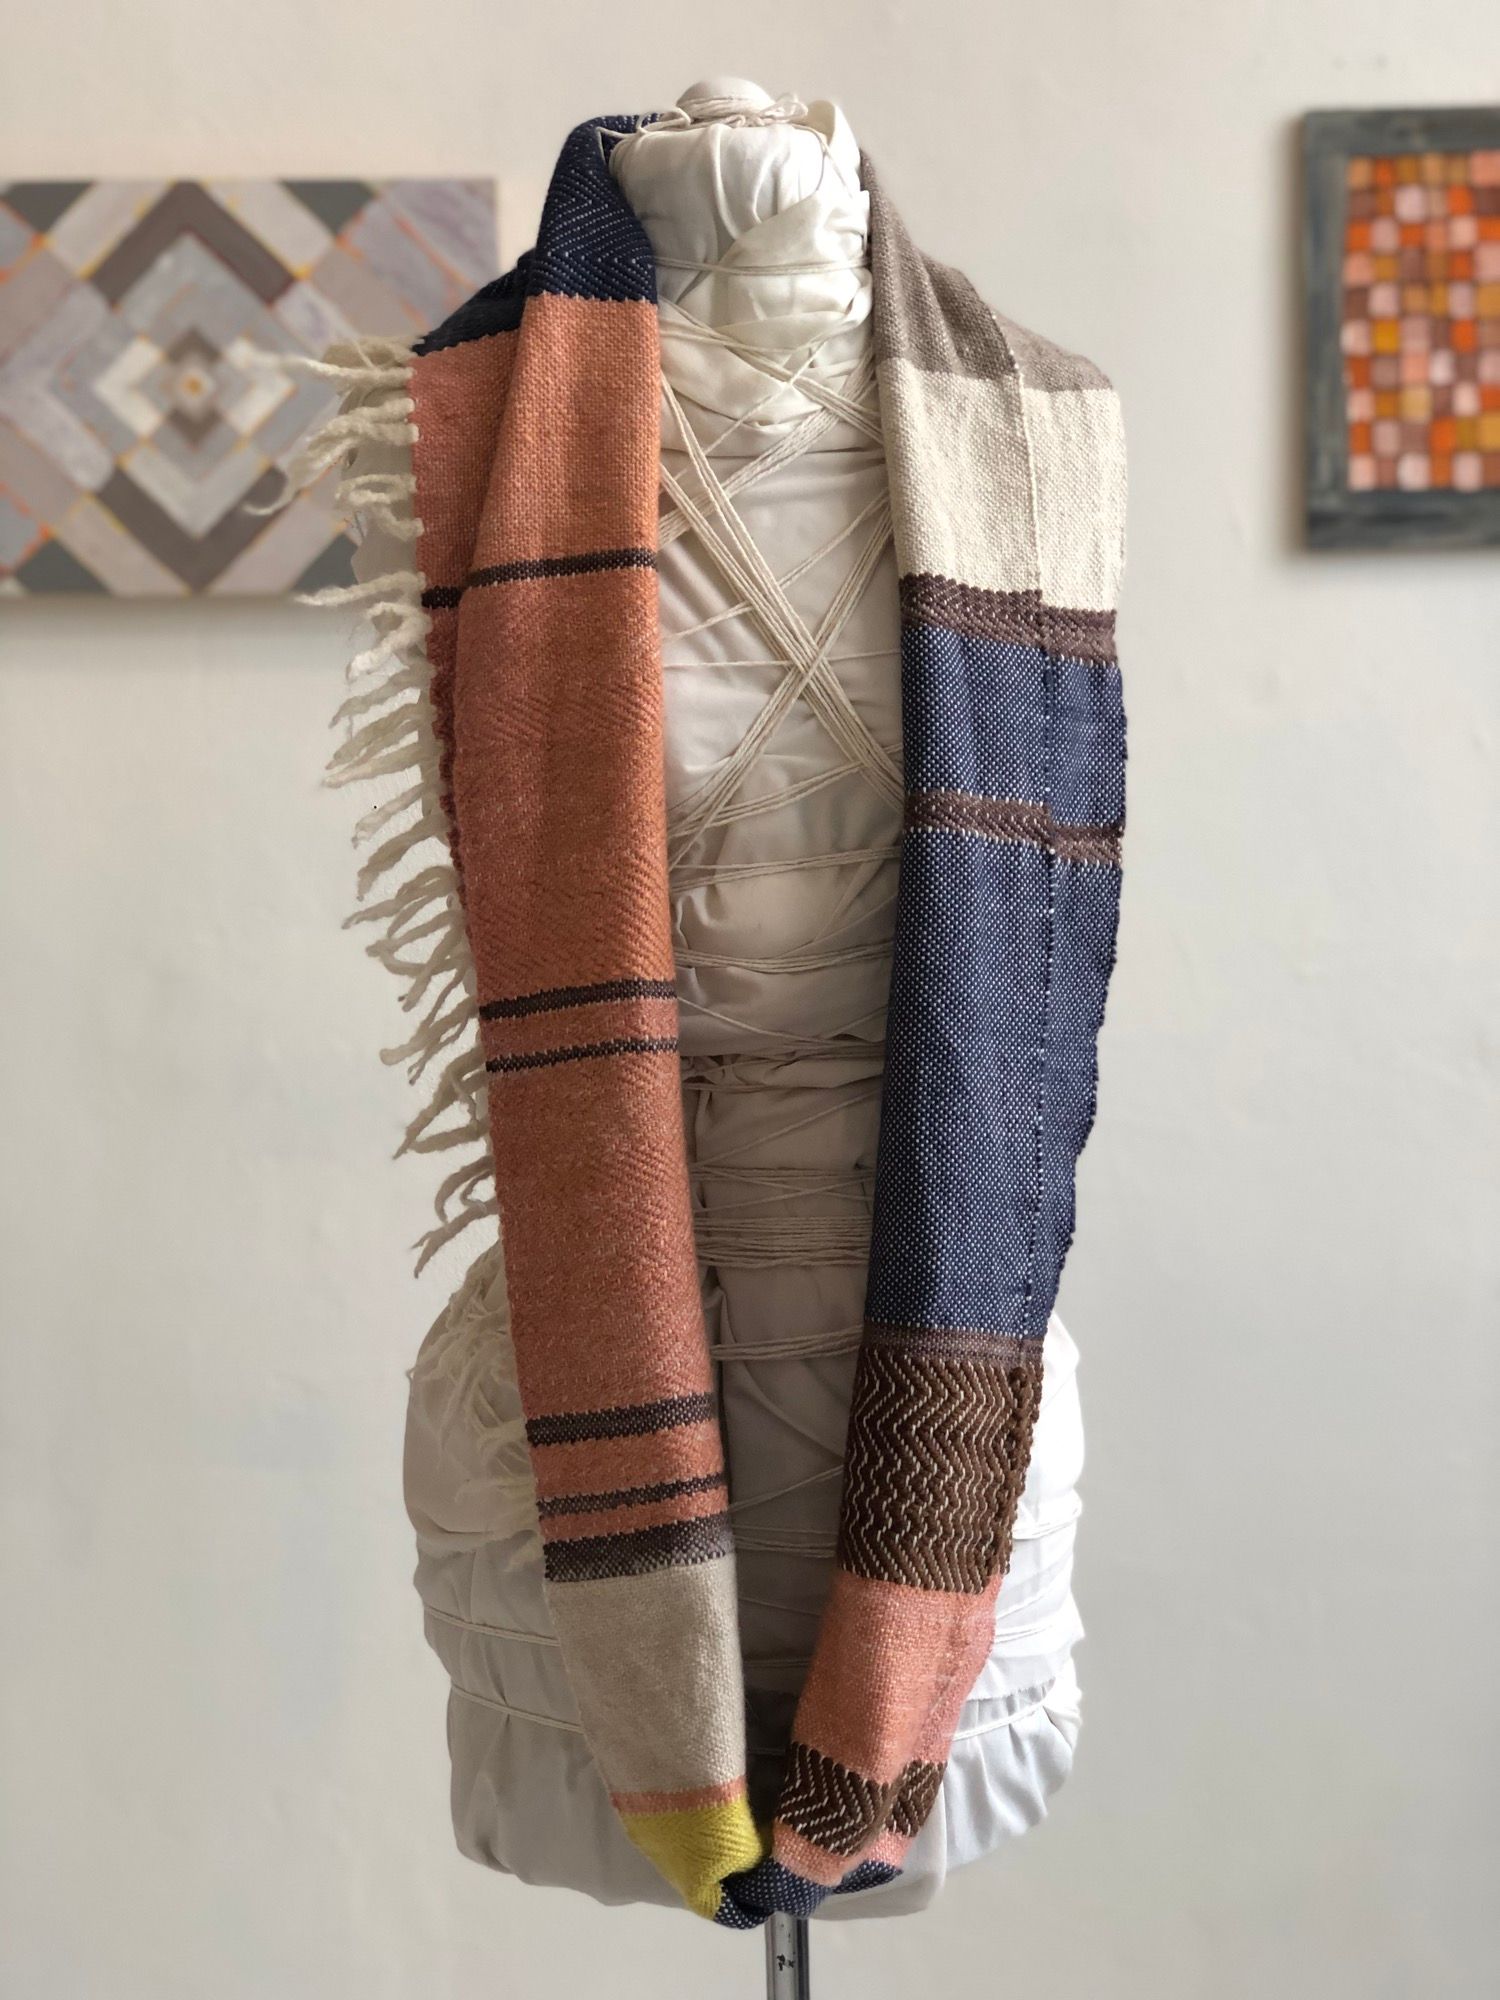 salmon, purple, brown, yellow and white handwoven cowl scarf with fringe on a white mannequin in a white walled gallery